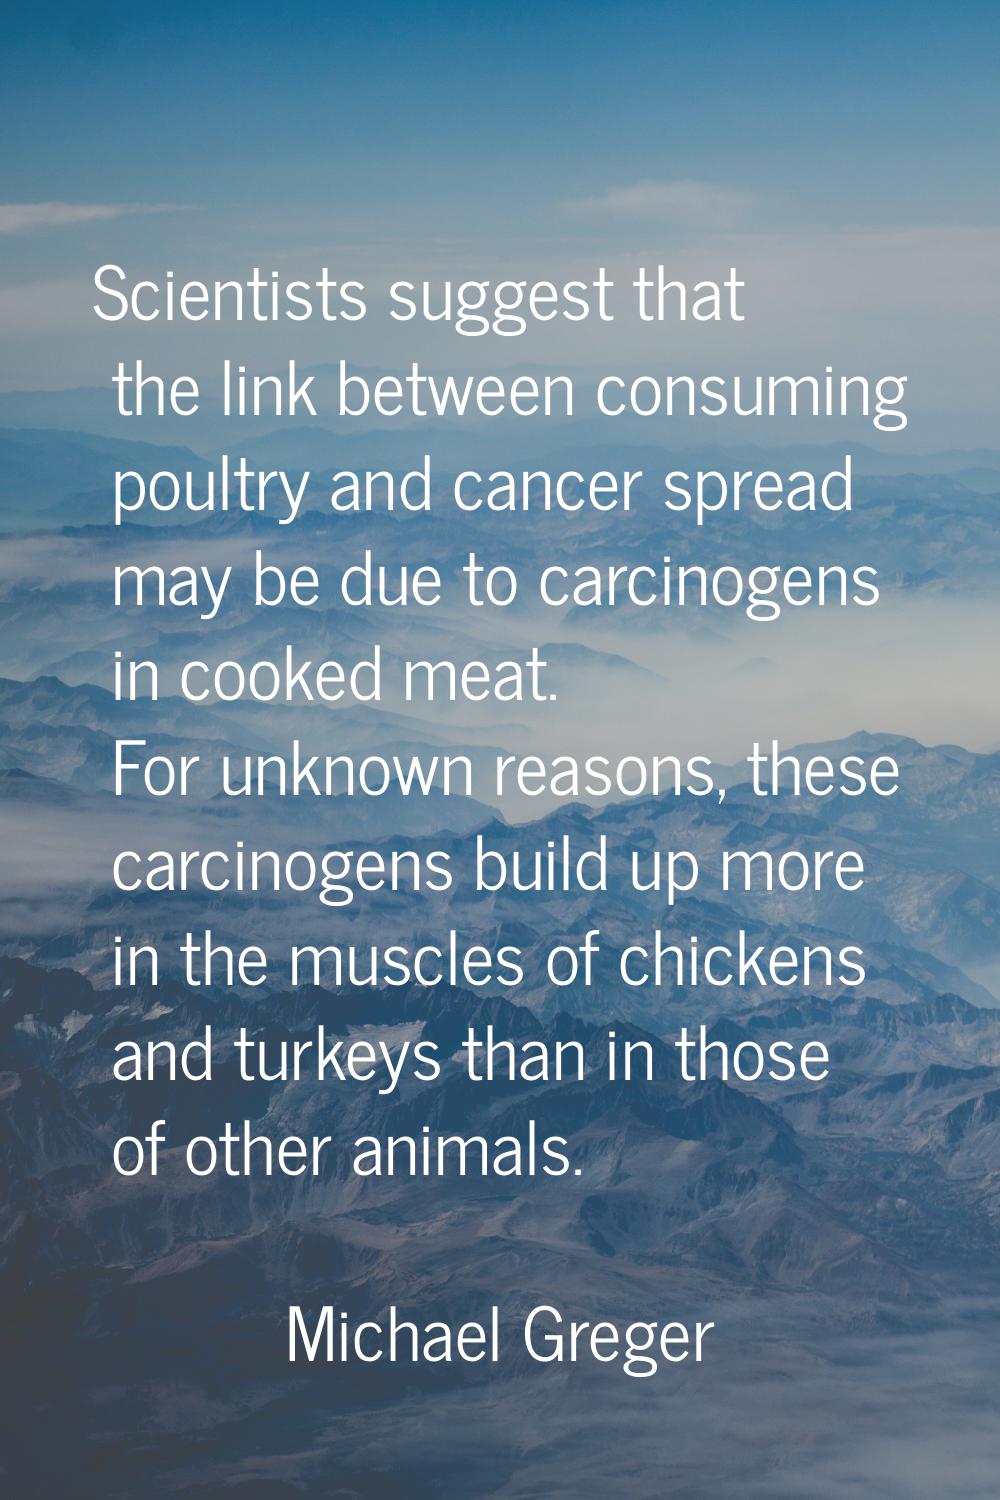 Scientists suggest that the link between consuming poultry and cancer spread may be due to carcinog